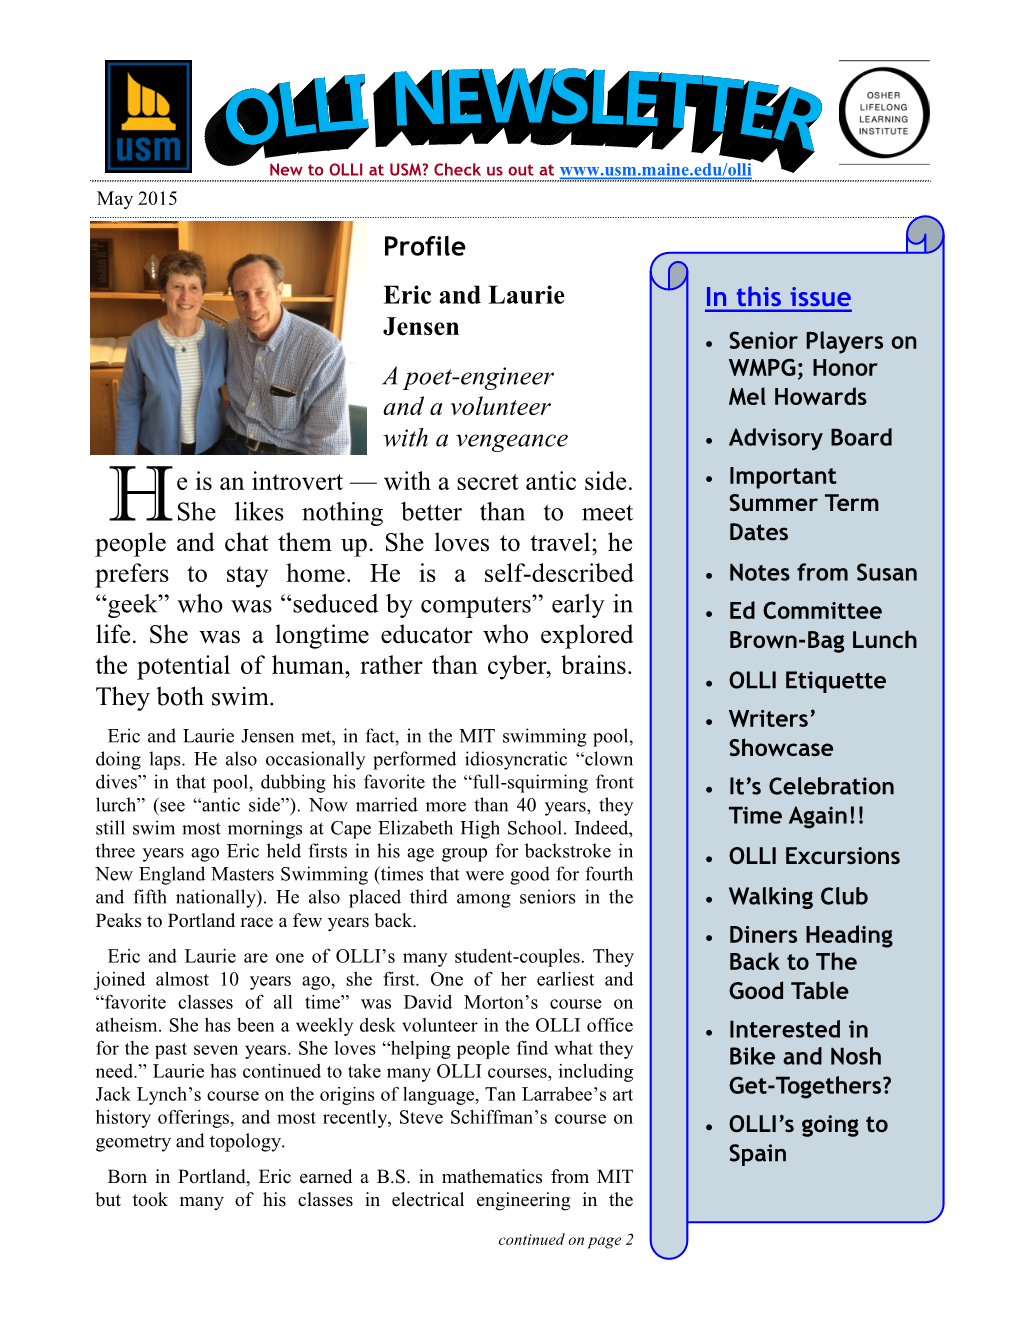 In This Issue Profile Eric and Laurie Jensen a Poet-Engineer and A